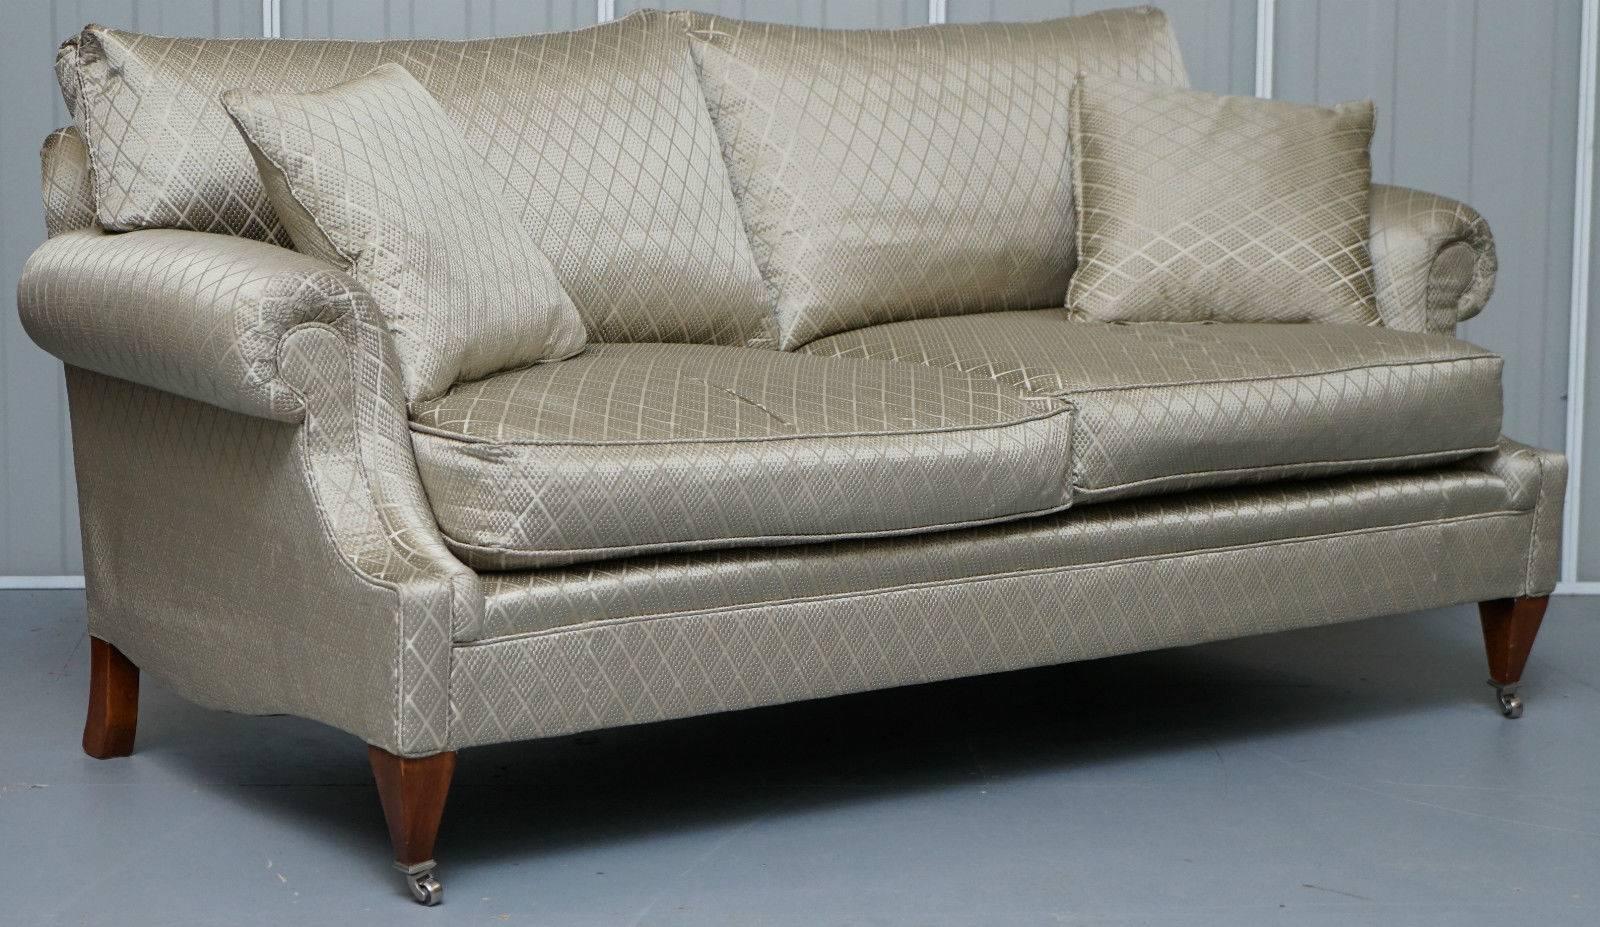 We are delighted to offer for sale this stunning this pair of stunning silk upholstered Harrods Mayfair Artistic upholstery sofas with all the original paperwork

Please note the delivery fee is just a guide, for an accurate cost please send me